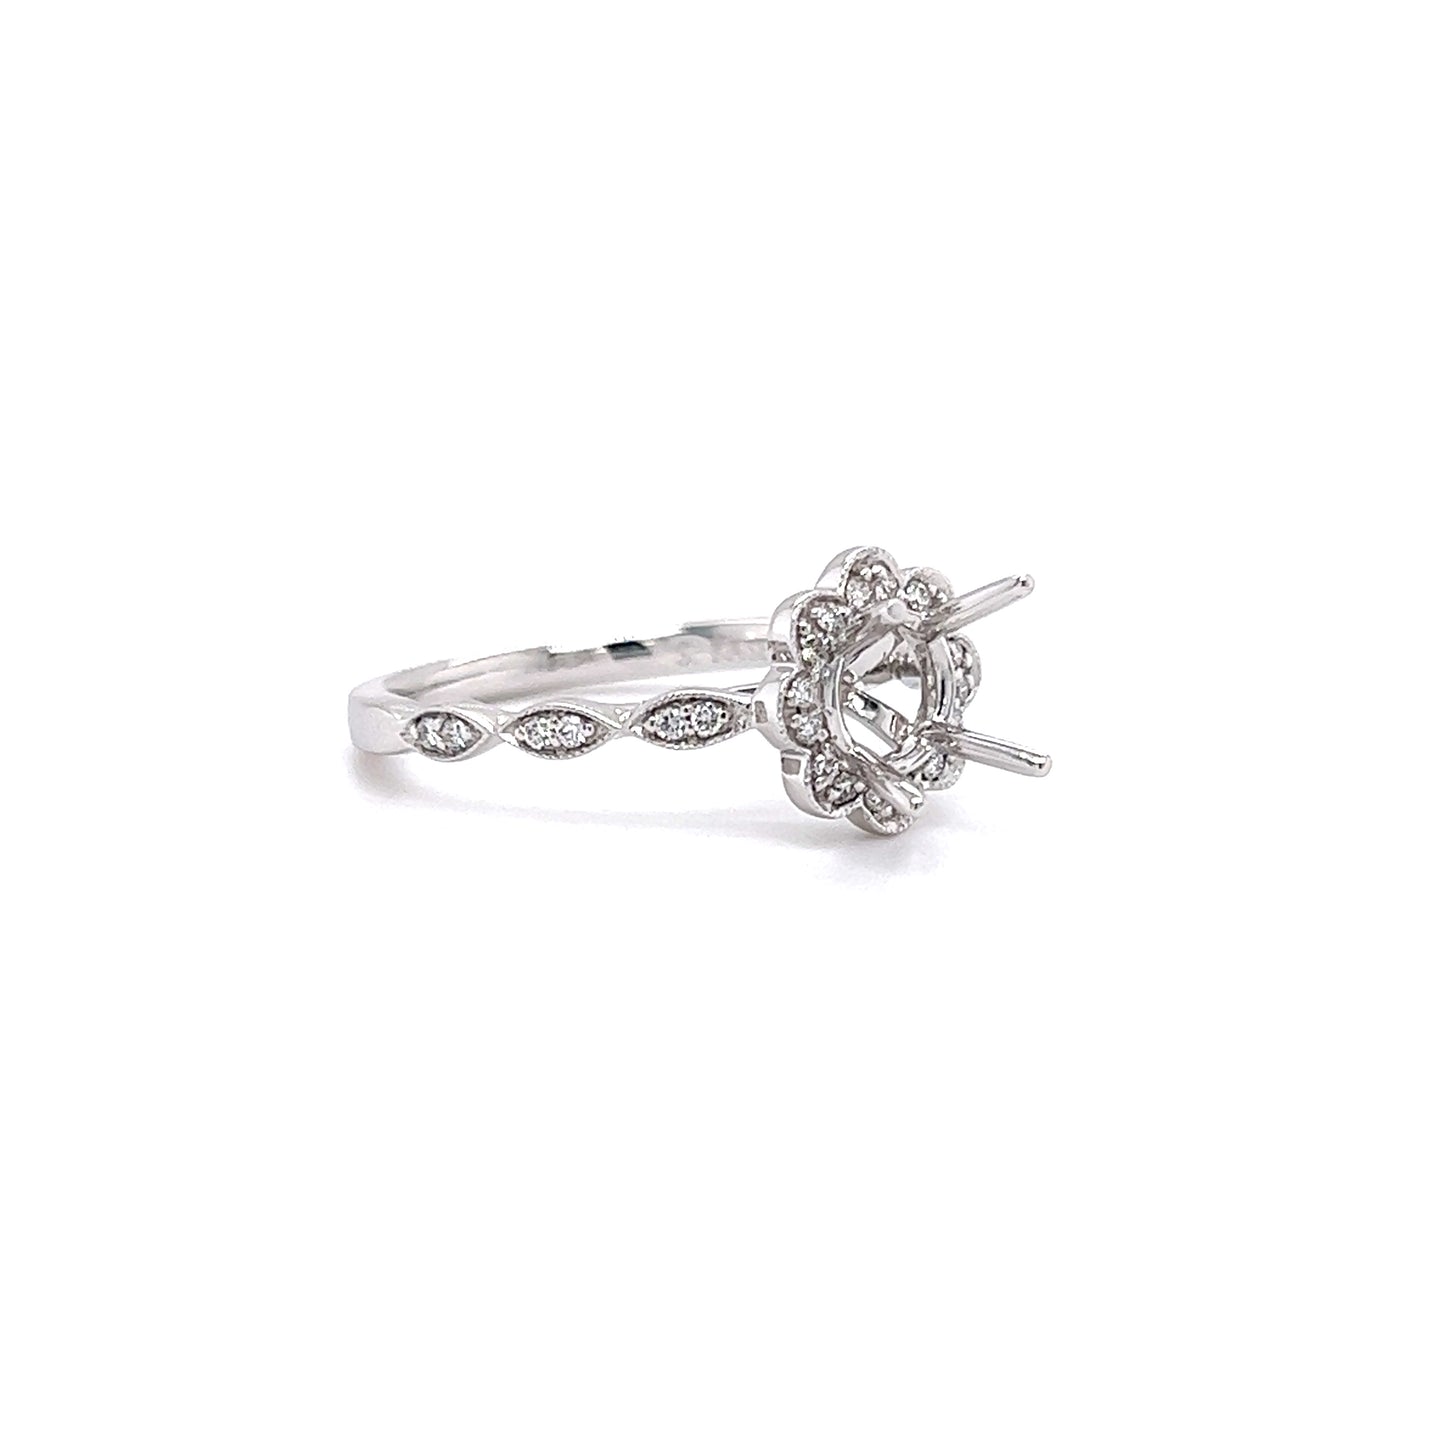 Diamond Ring Setting with Floral Diamond Halo in 14K White Gold Left Side View